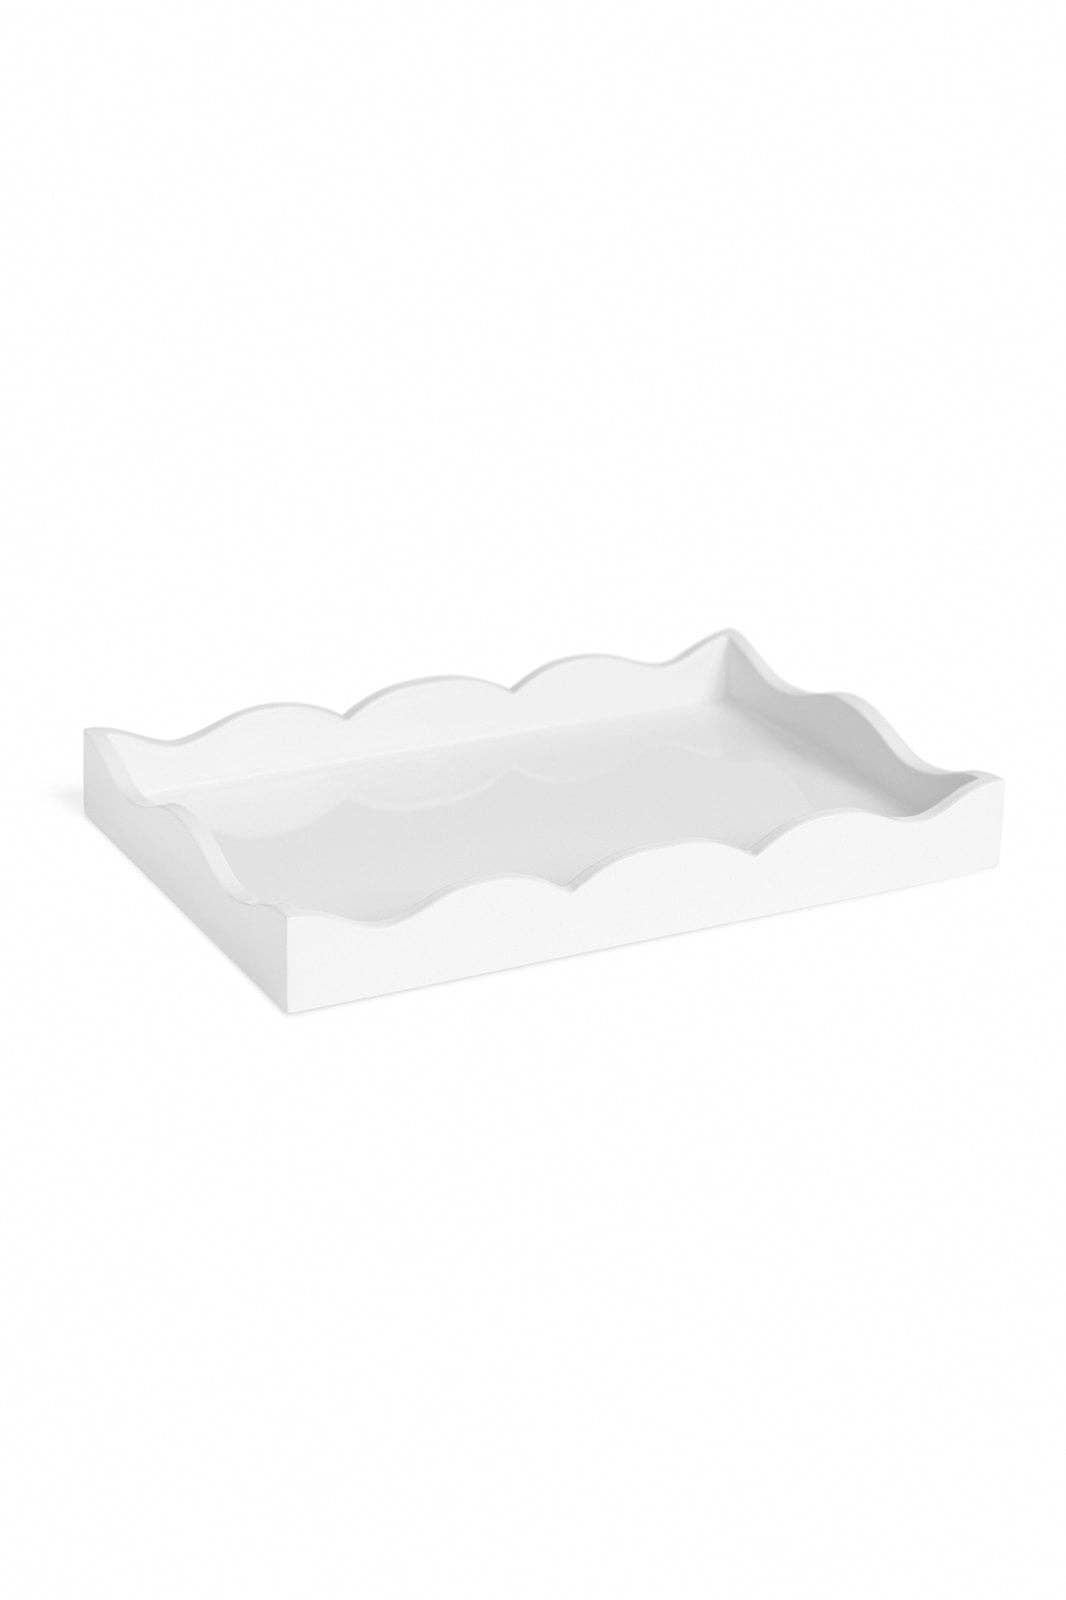 Serendipity Scalloped, Lacquer Book Topper Tray: Cloud